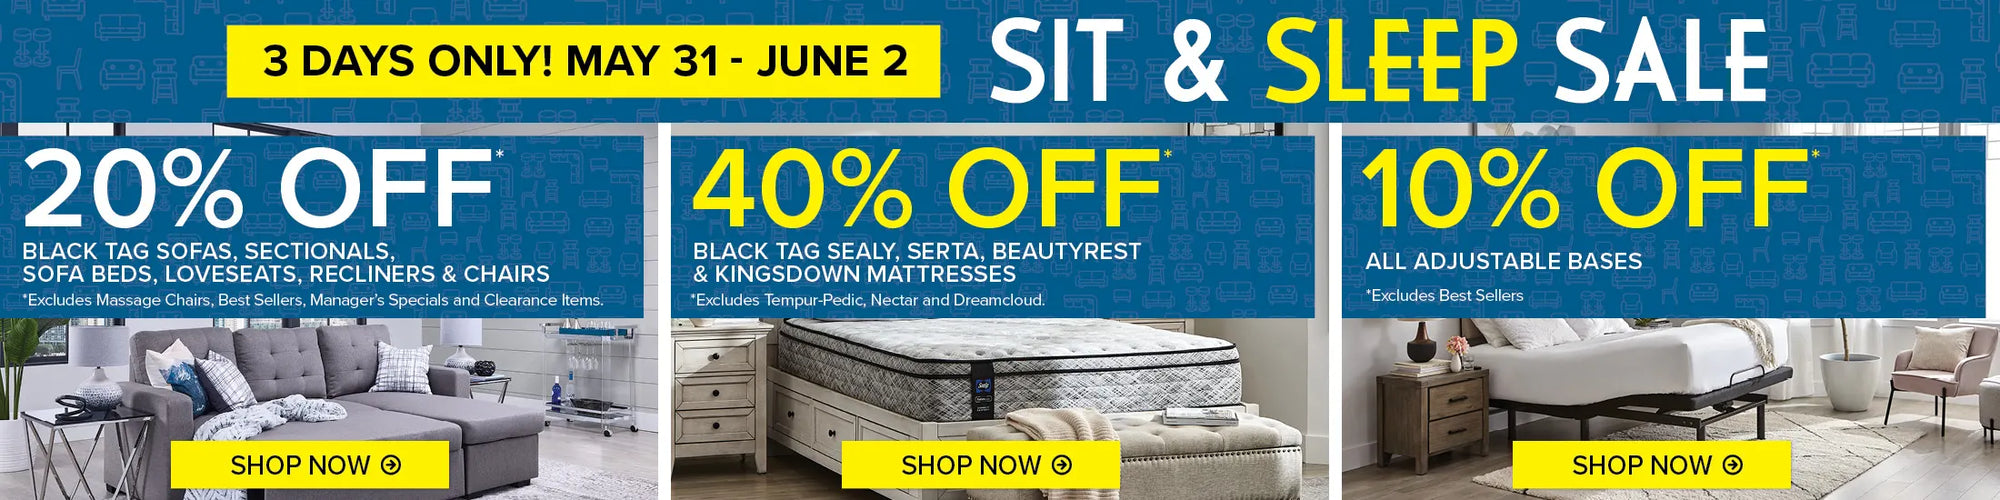 3 Days Only! May 31-June 2 Sit & Sleep Sale. 20% off black tag sectionals, sofas, loveseats, recliners & chairs. 40% off black tag sealy, serta, kingsdown and beautyrest mattresses. 10% off all adjustable bases.